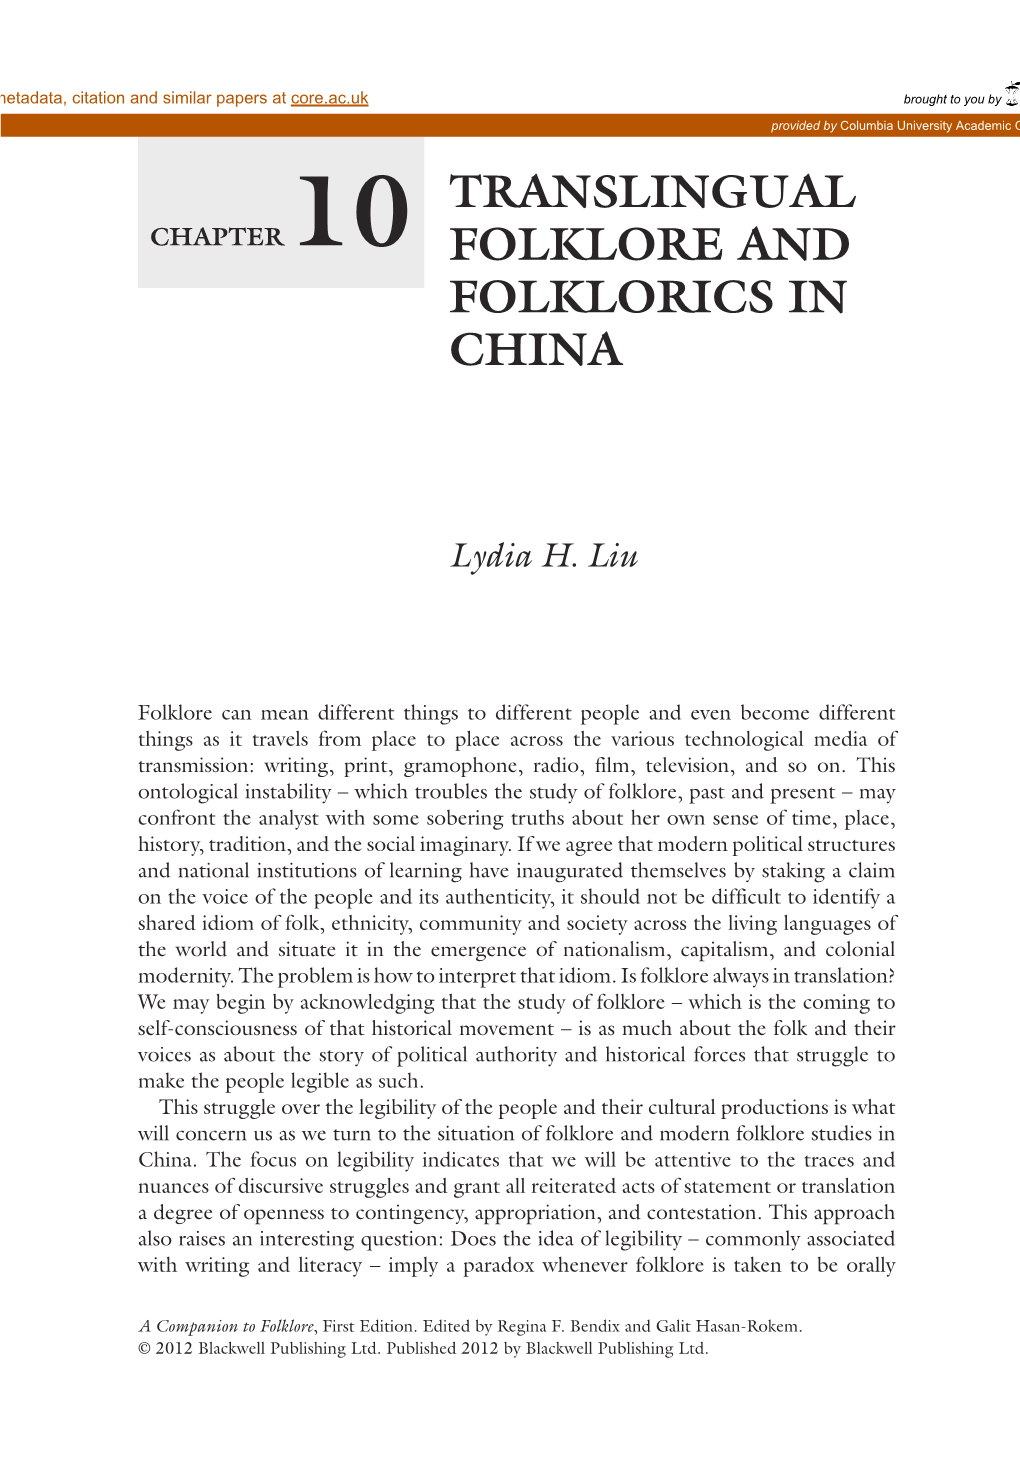 Translingual Folklore and Folklorics in China